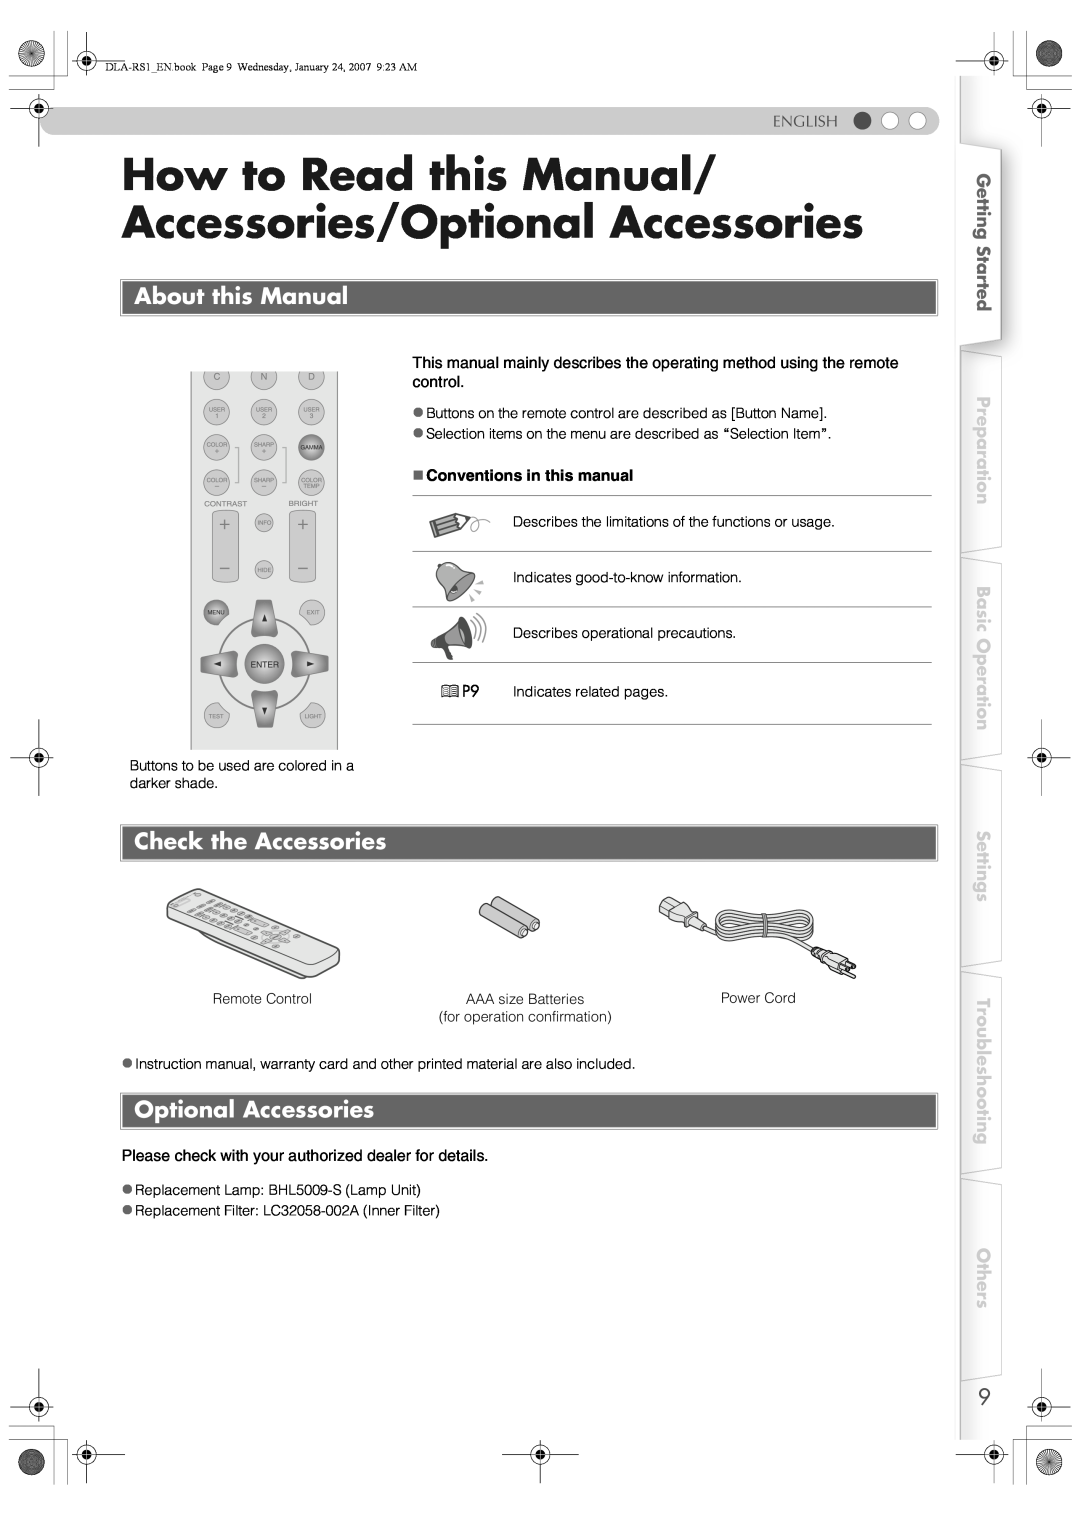 JVC DLA-RS1 How to Read this Manual/ Accessories/Optional Accessories, About this Manual, Check the Accessories, English 